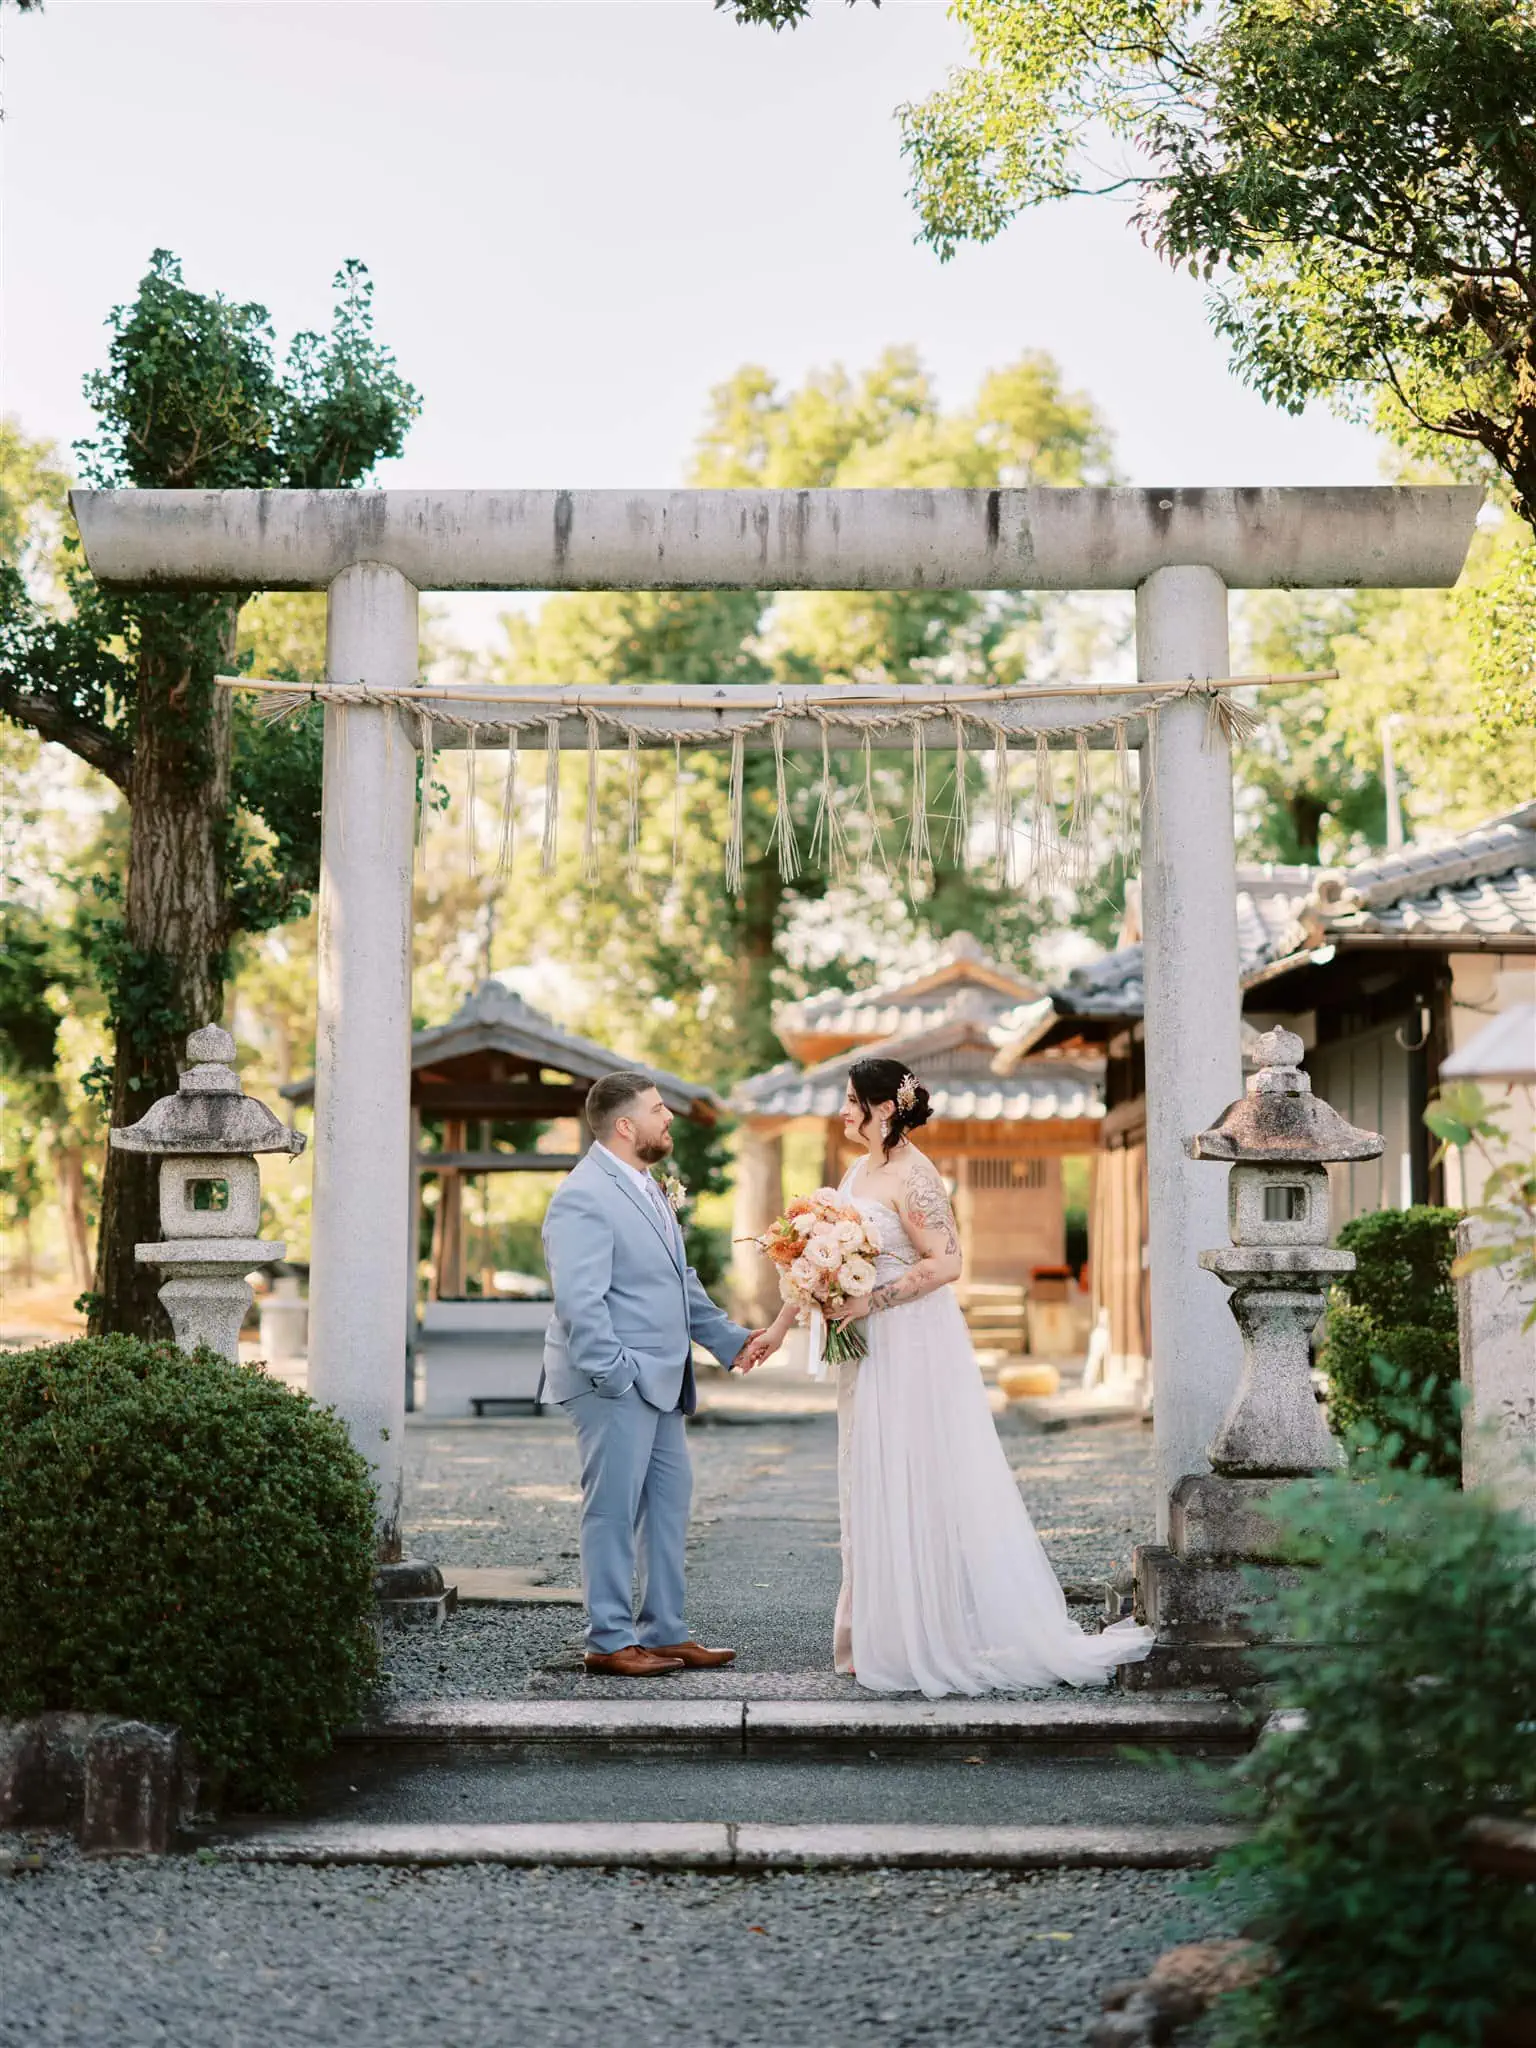 Kyoto Tokyo Japan Elopement Wedding Photographer, Planner & Videographer | A Japan elopement captured by a photographer, showcasing a bride and groom standing in front of a traditional Japanese torii gate.